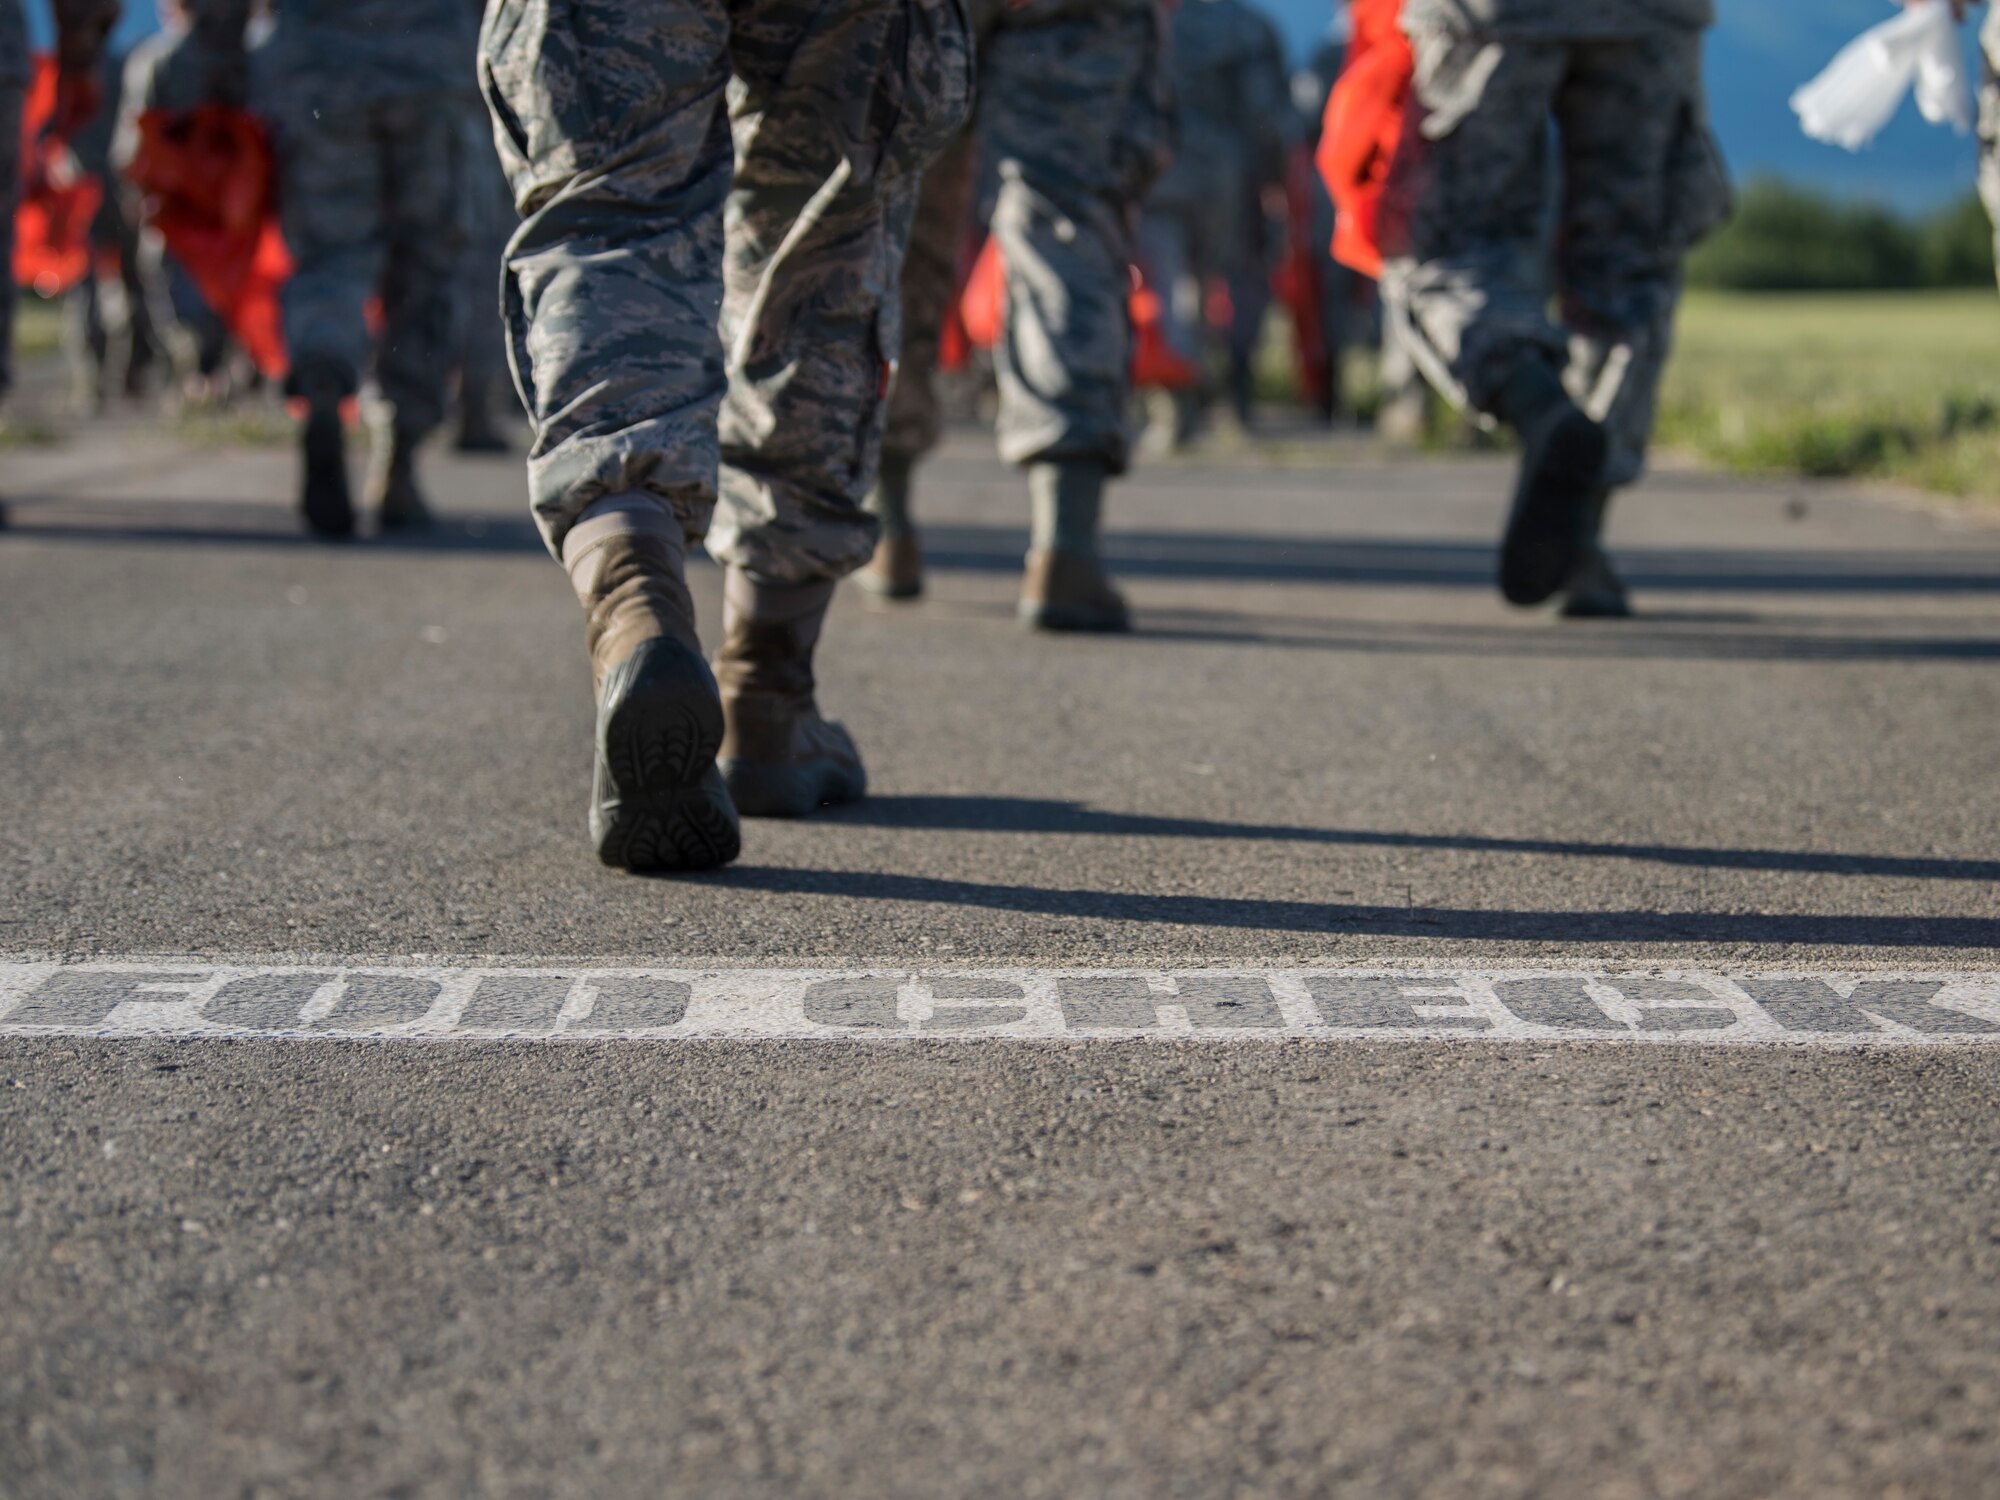 Joint Base Elmendorf-Richardson Airmen walk toward the flight line as they prepare to conduct a foreign object and debris walk at JBER, Alaska, July 2, 2018. The Airmen conducted the FOD walk after the Arctic Thunder Open House to remove debris that could damage aircraft and hinder mission readiness.